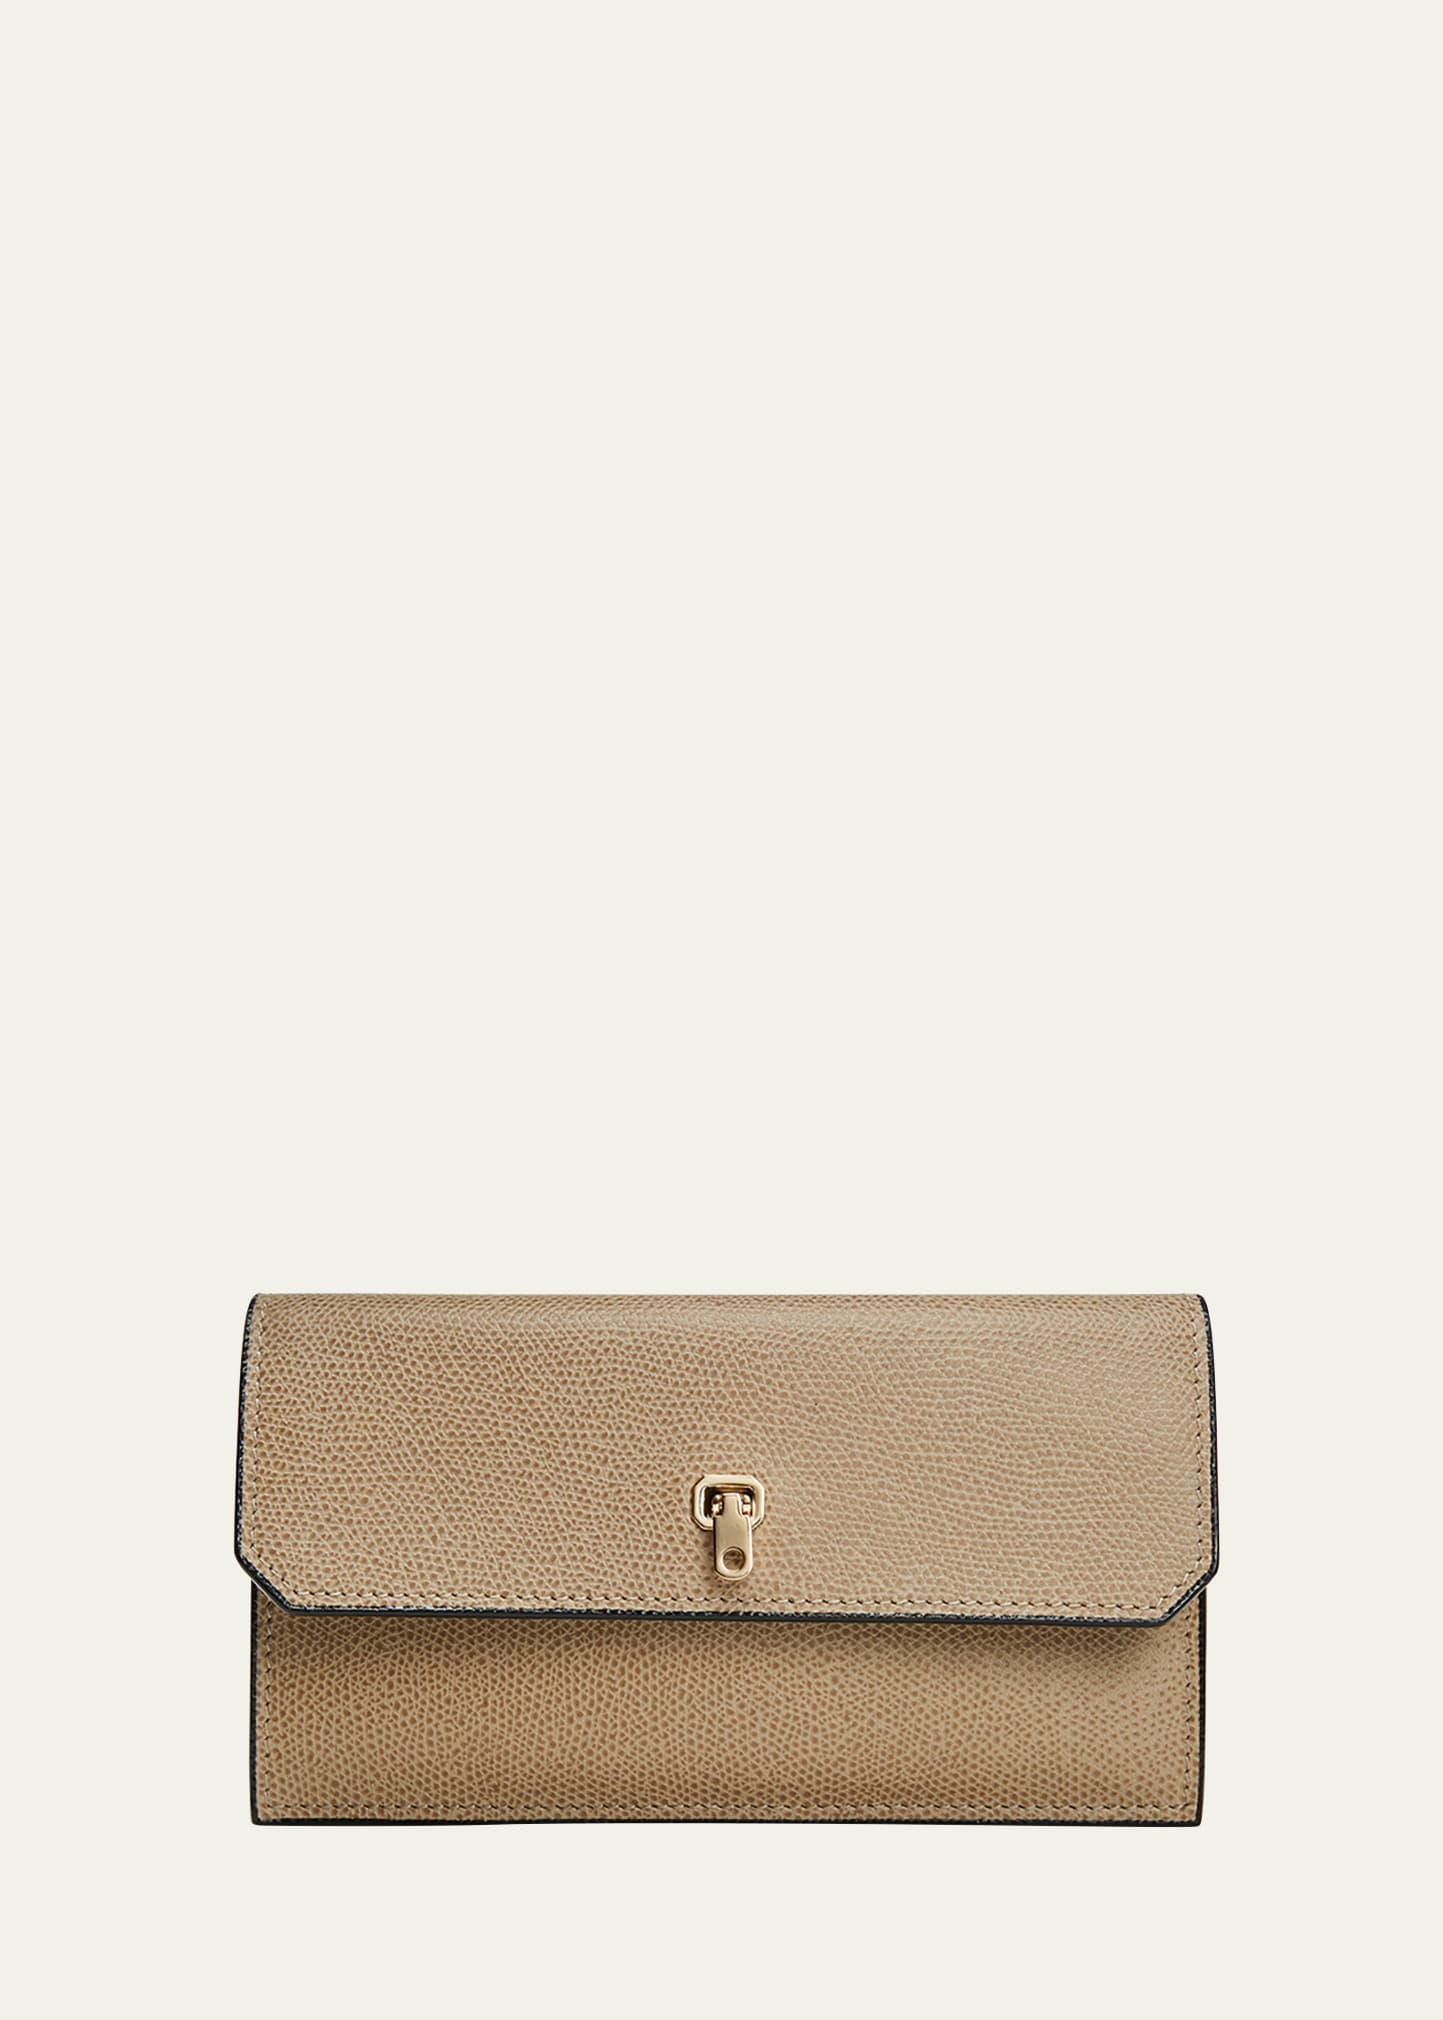 Valextra Brera Flap Leather Wallet In Mo Oyster